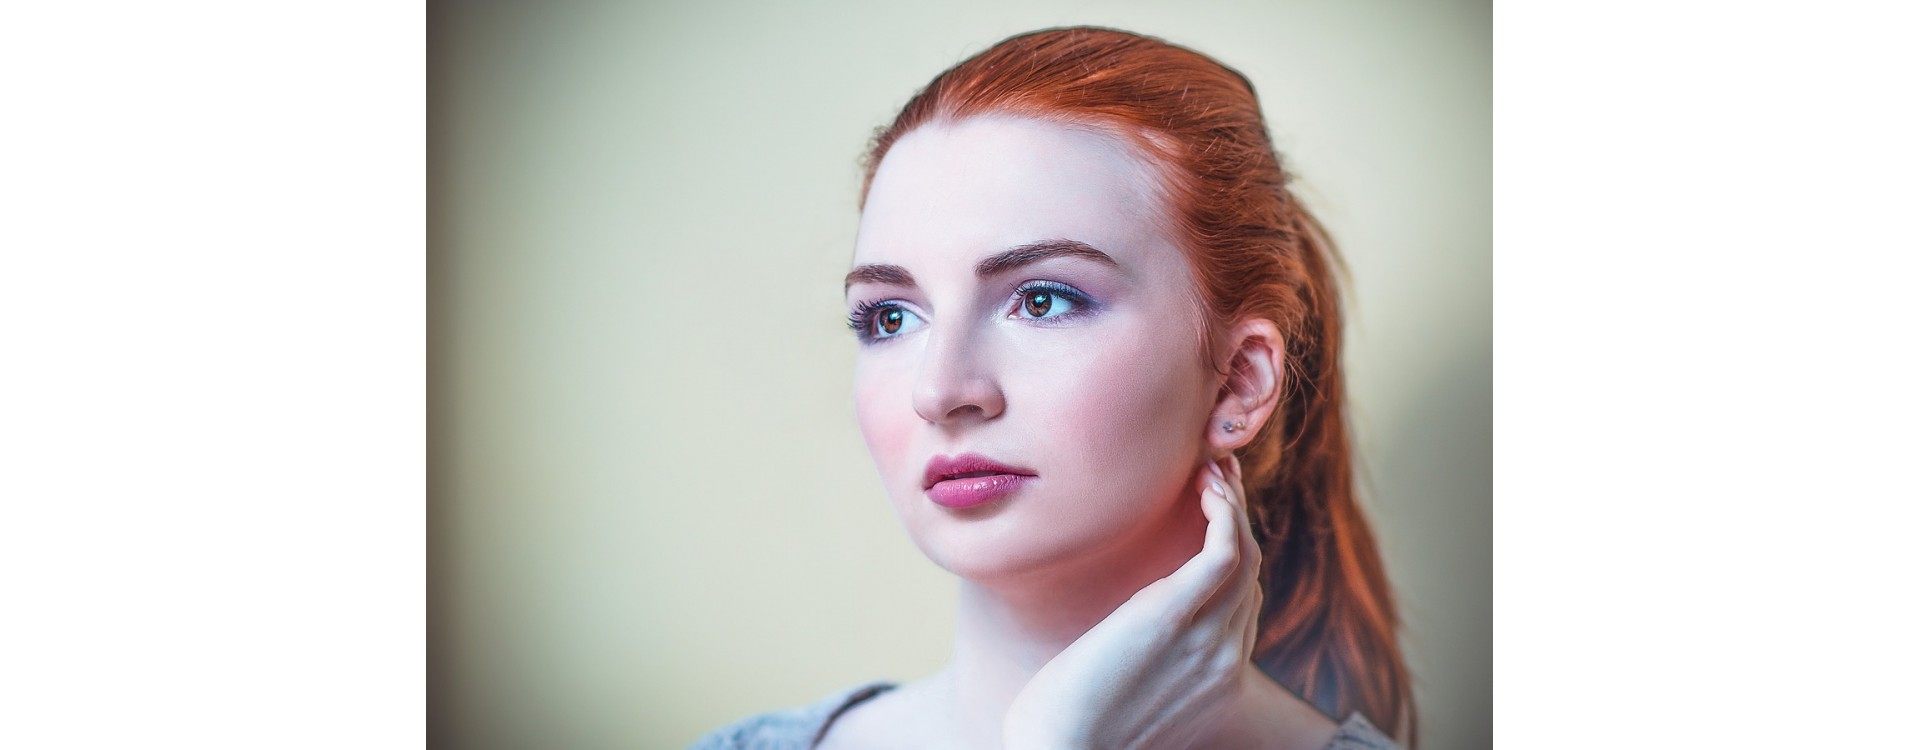 Quel maquillage adopter quand on est rousse ?